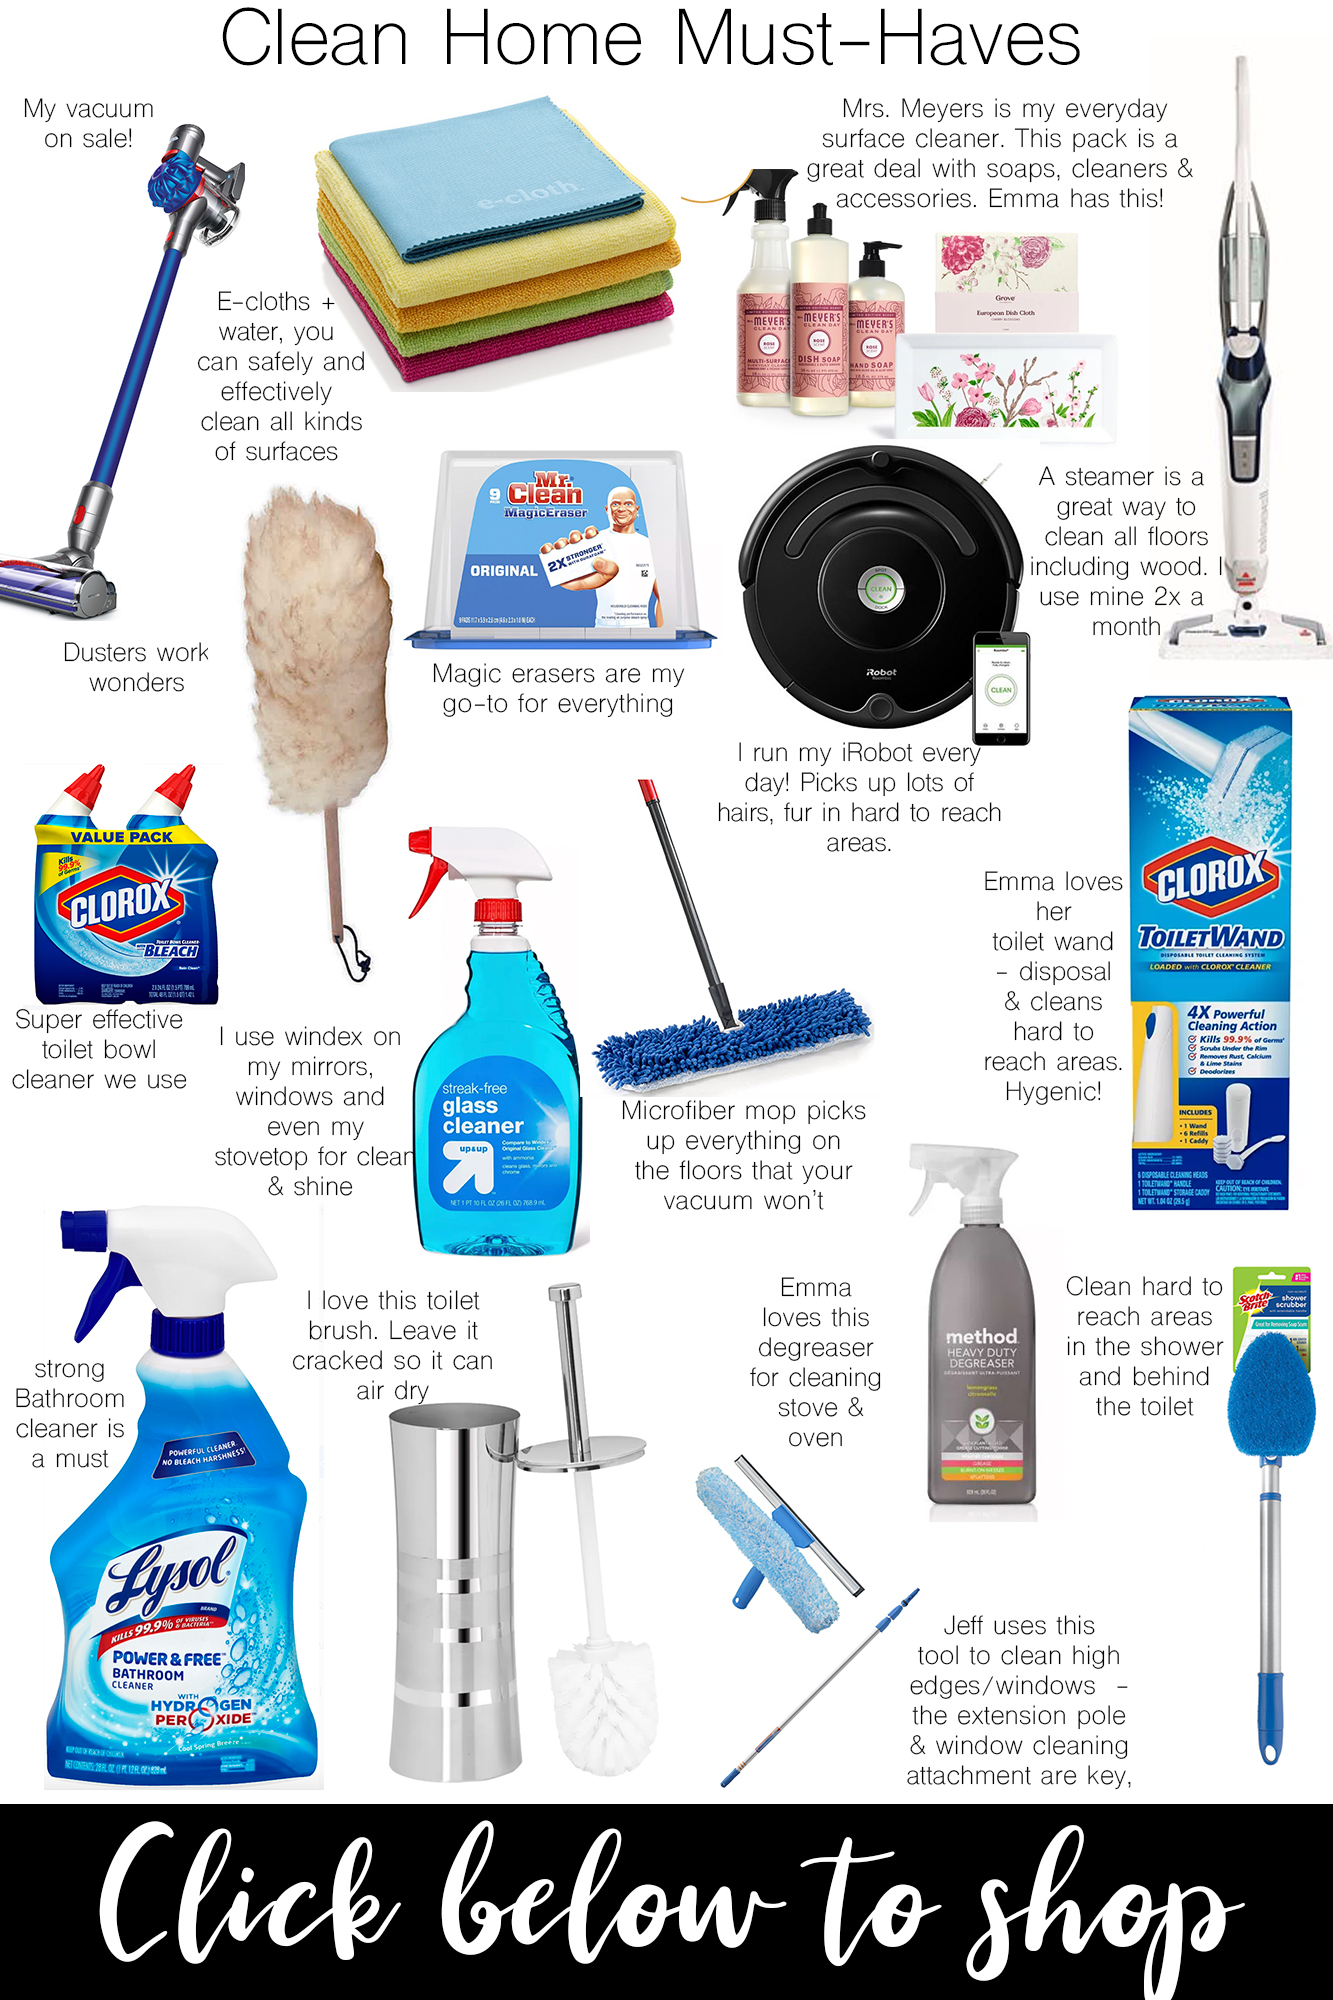 16 Cleaning Supplies & Tools You Can't Live Without - Best deep cleaning routine and cleaning products everyone needs in their home. Disinfect your home!